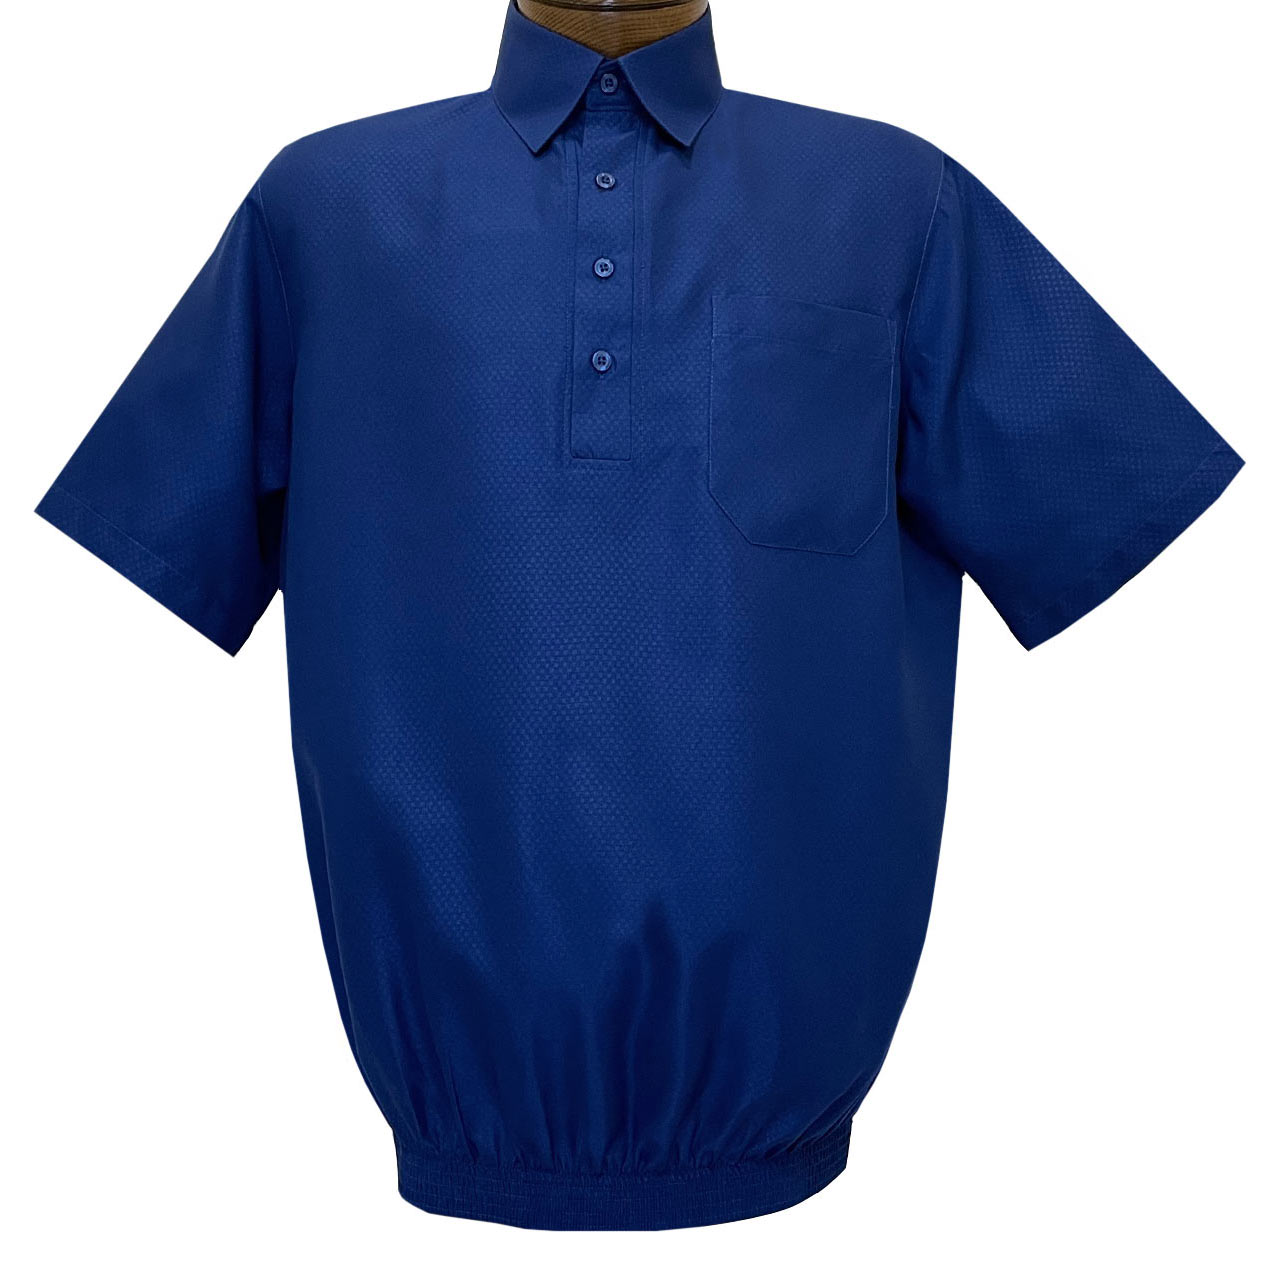 Men's Banded Bottom Short Sleeve Microfiber Shirt By Bassiri, Our Exclusive Handpicked Designs #S20265 Medium Blue